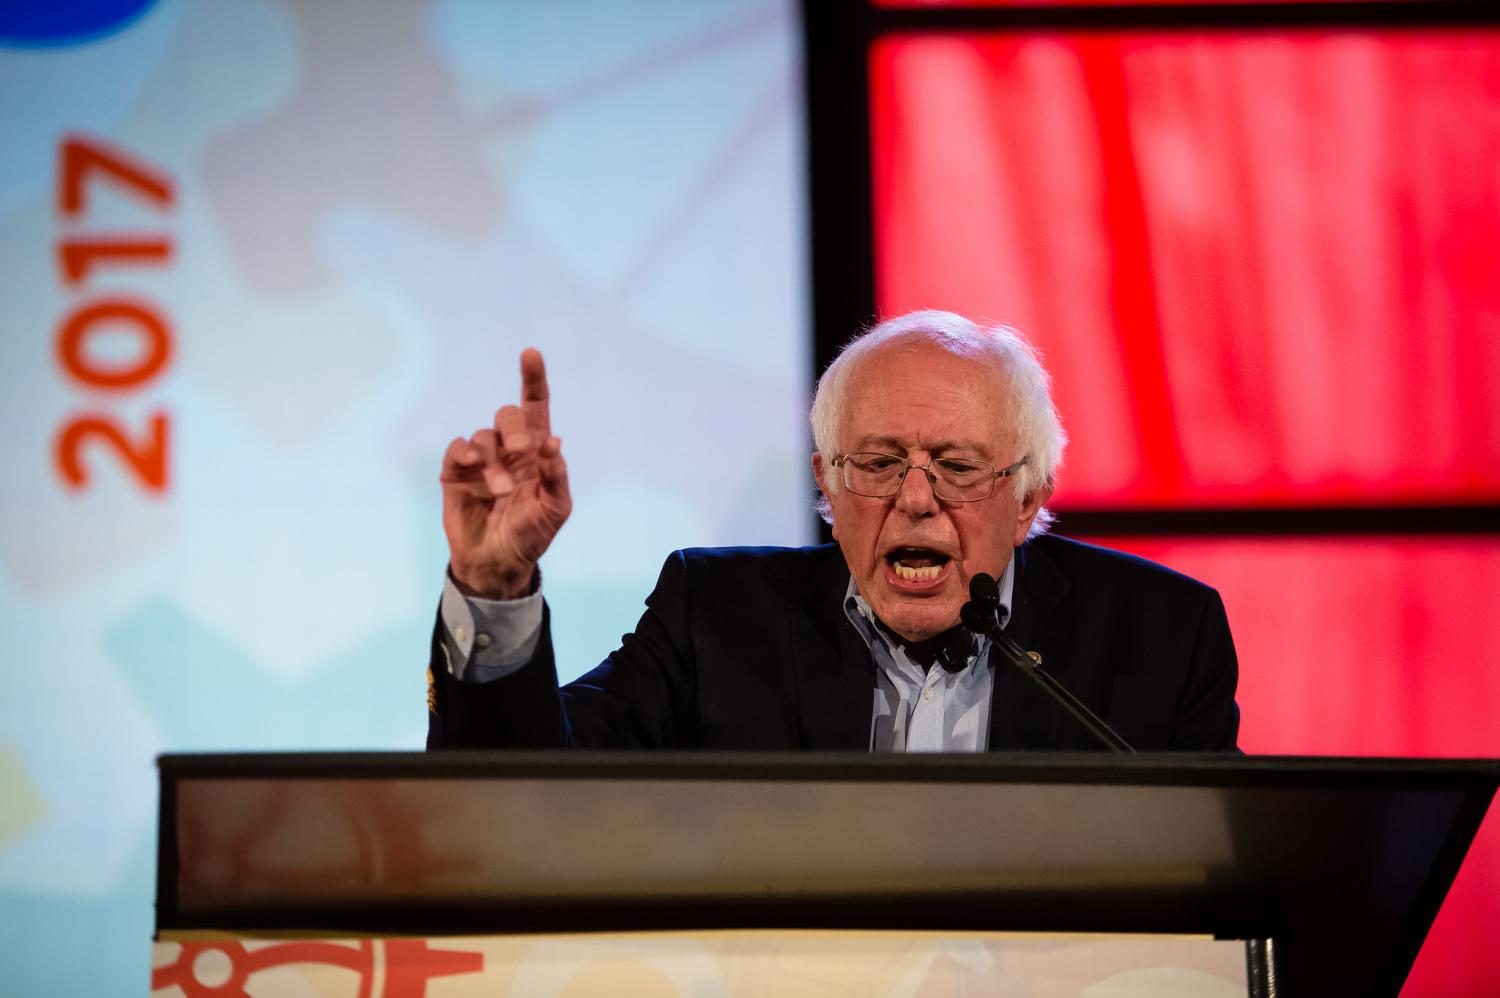 U.S. Sen Bernie Sanders (I-Vt.) speaks at the Peoples Summit in Chicago. The former presidential candidate addressed future steps for the Democratic Party after its 2016 election defeat.